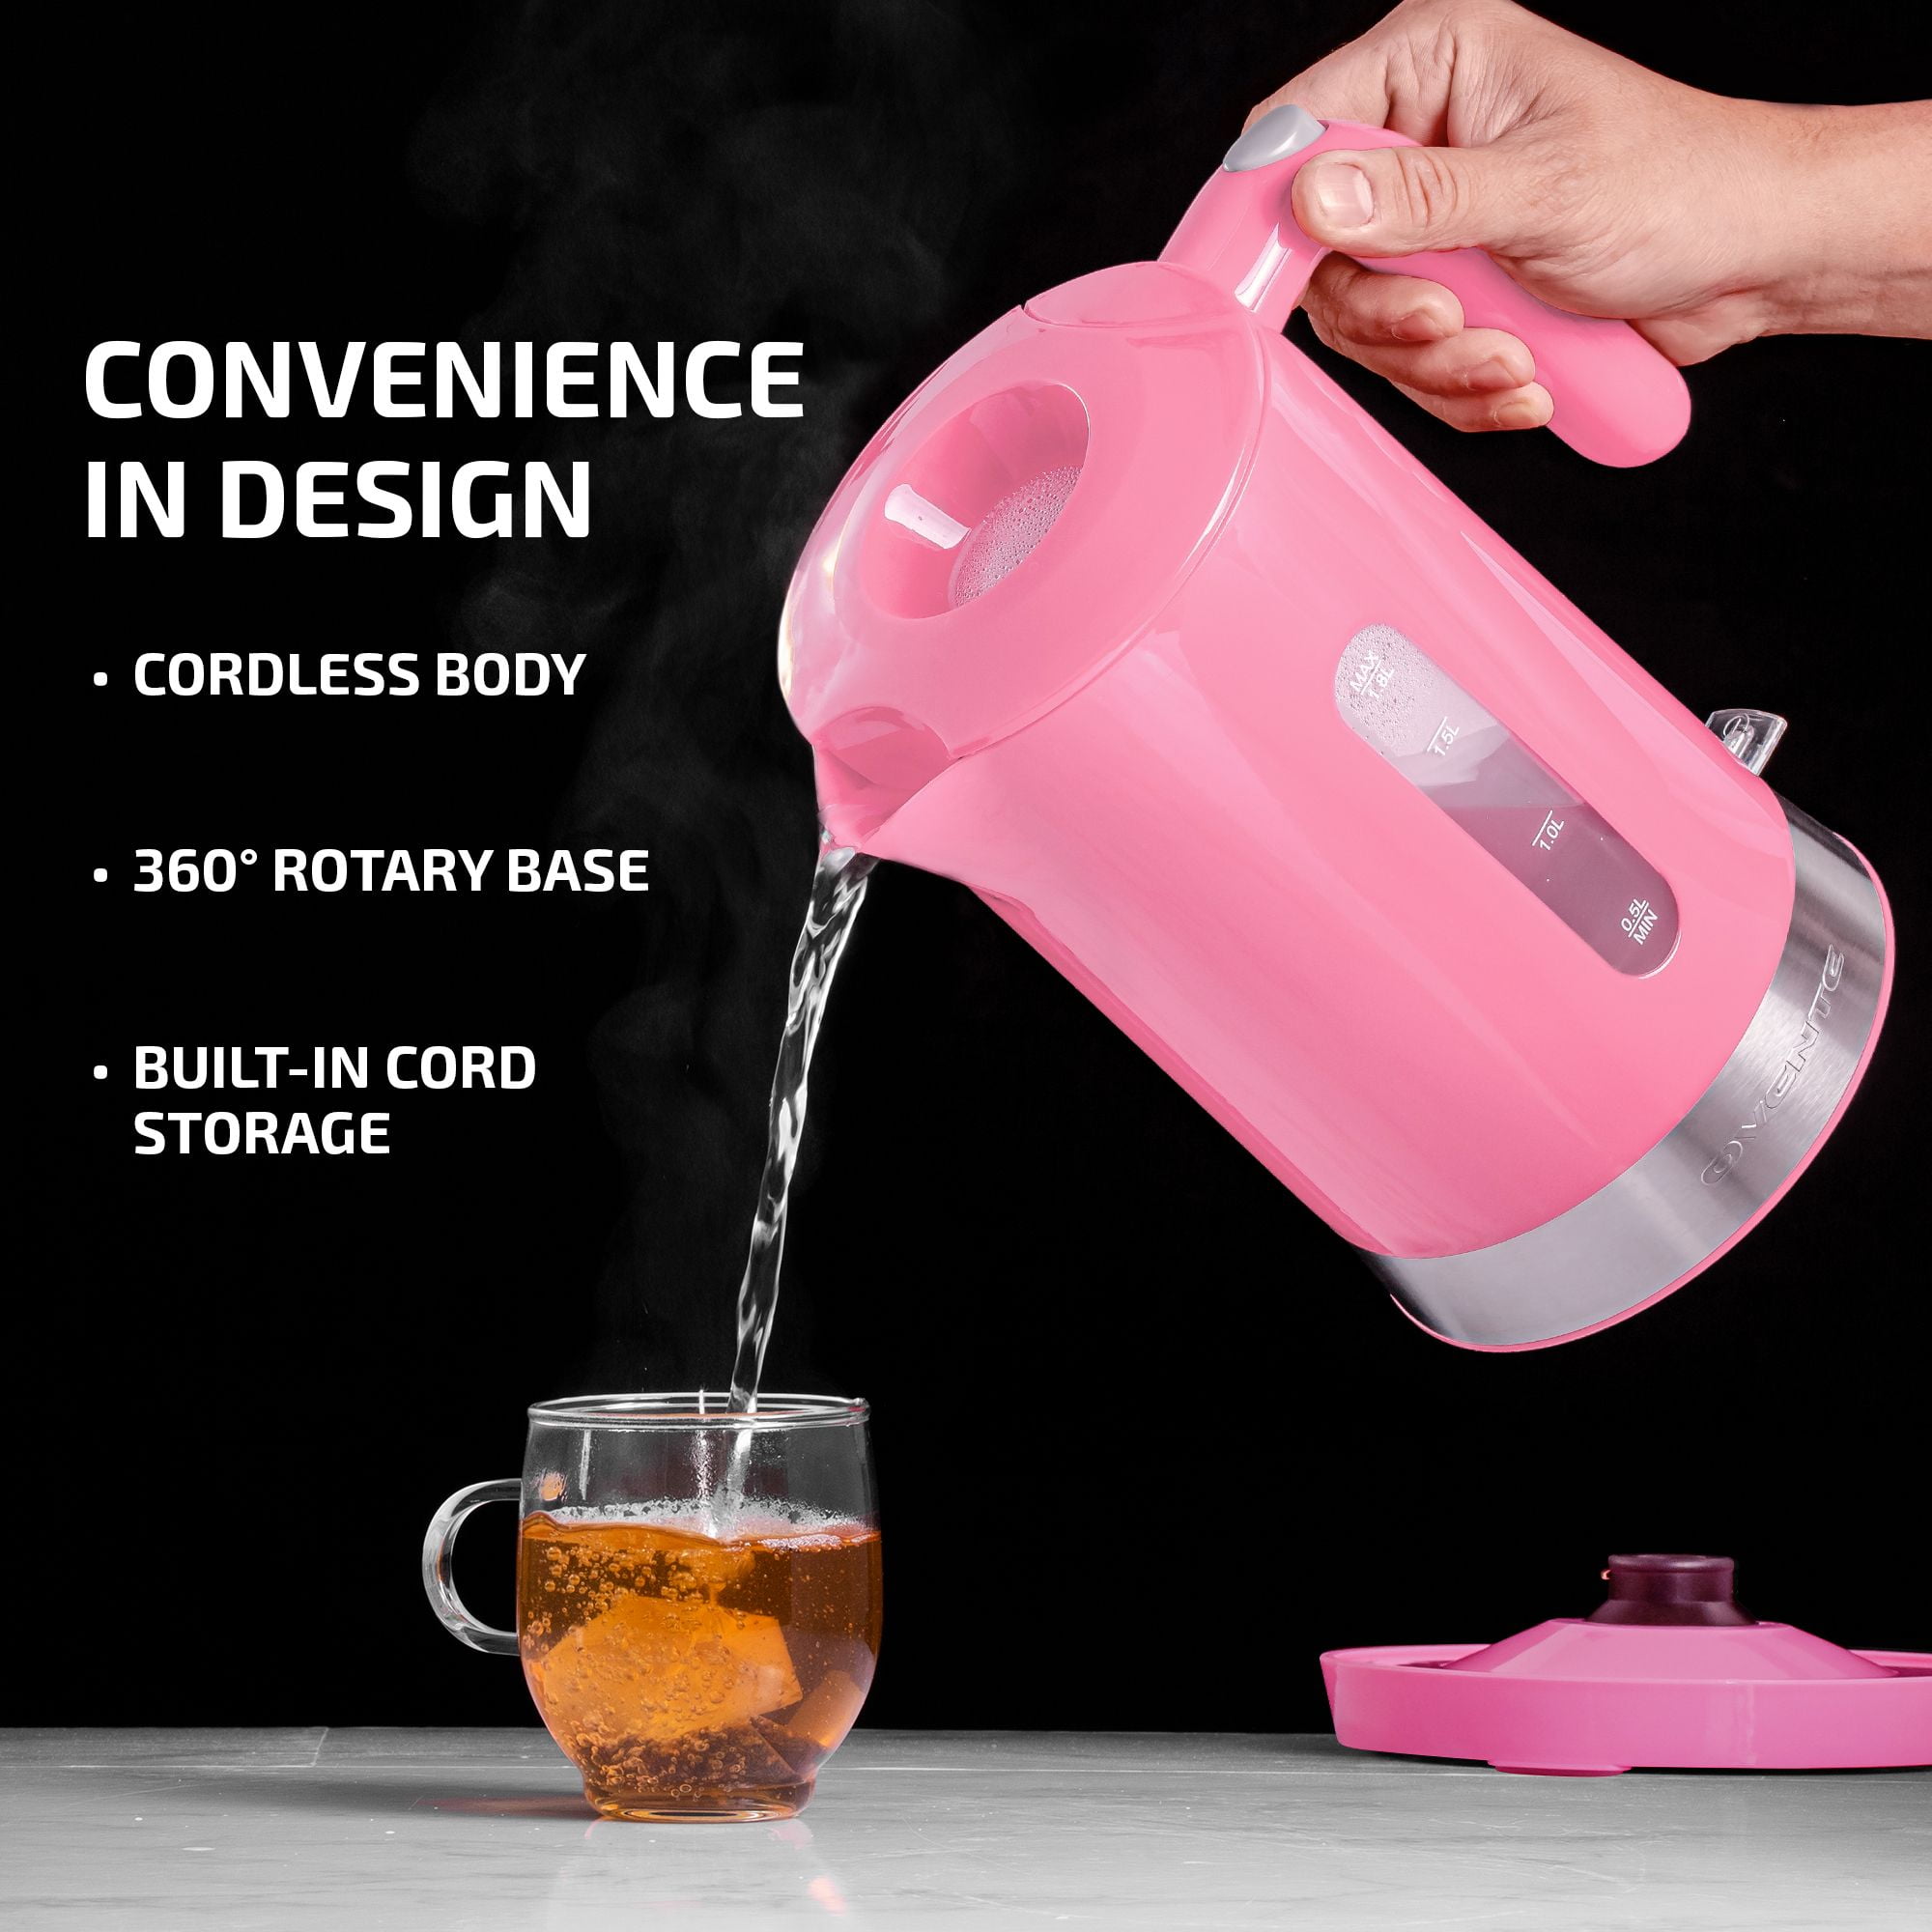 OVENTE Portable Tea Kettle and Instant Water Heater 1-Cup 1.8